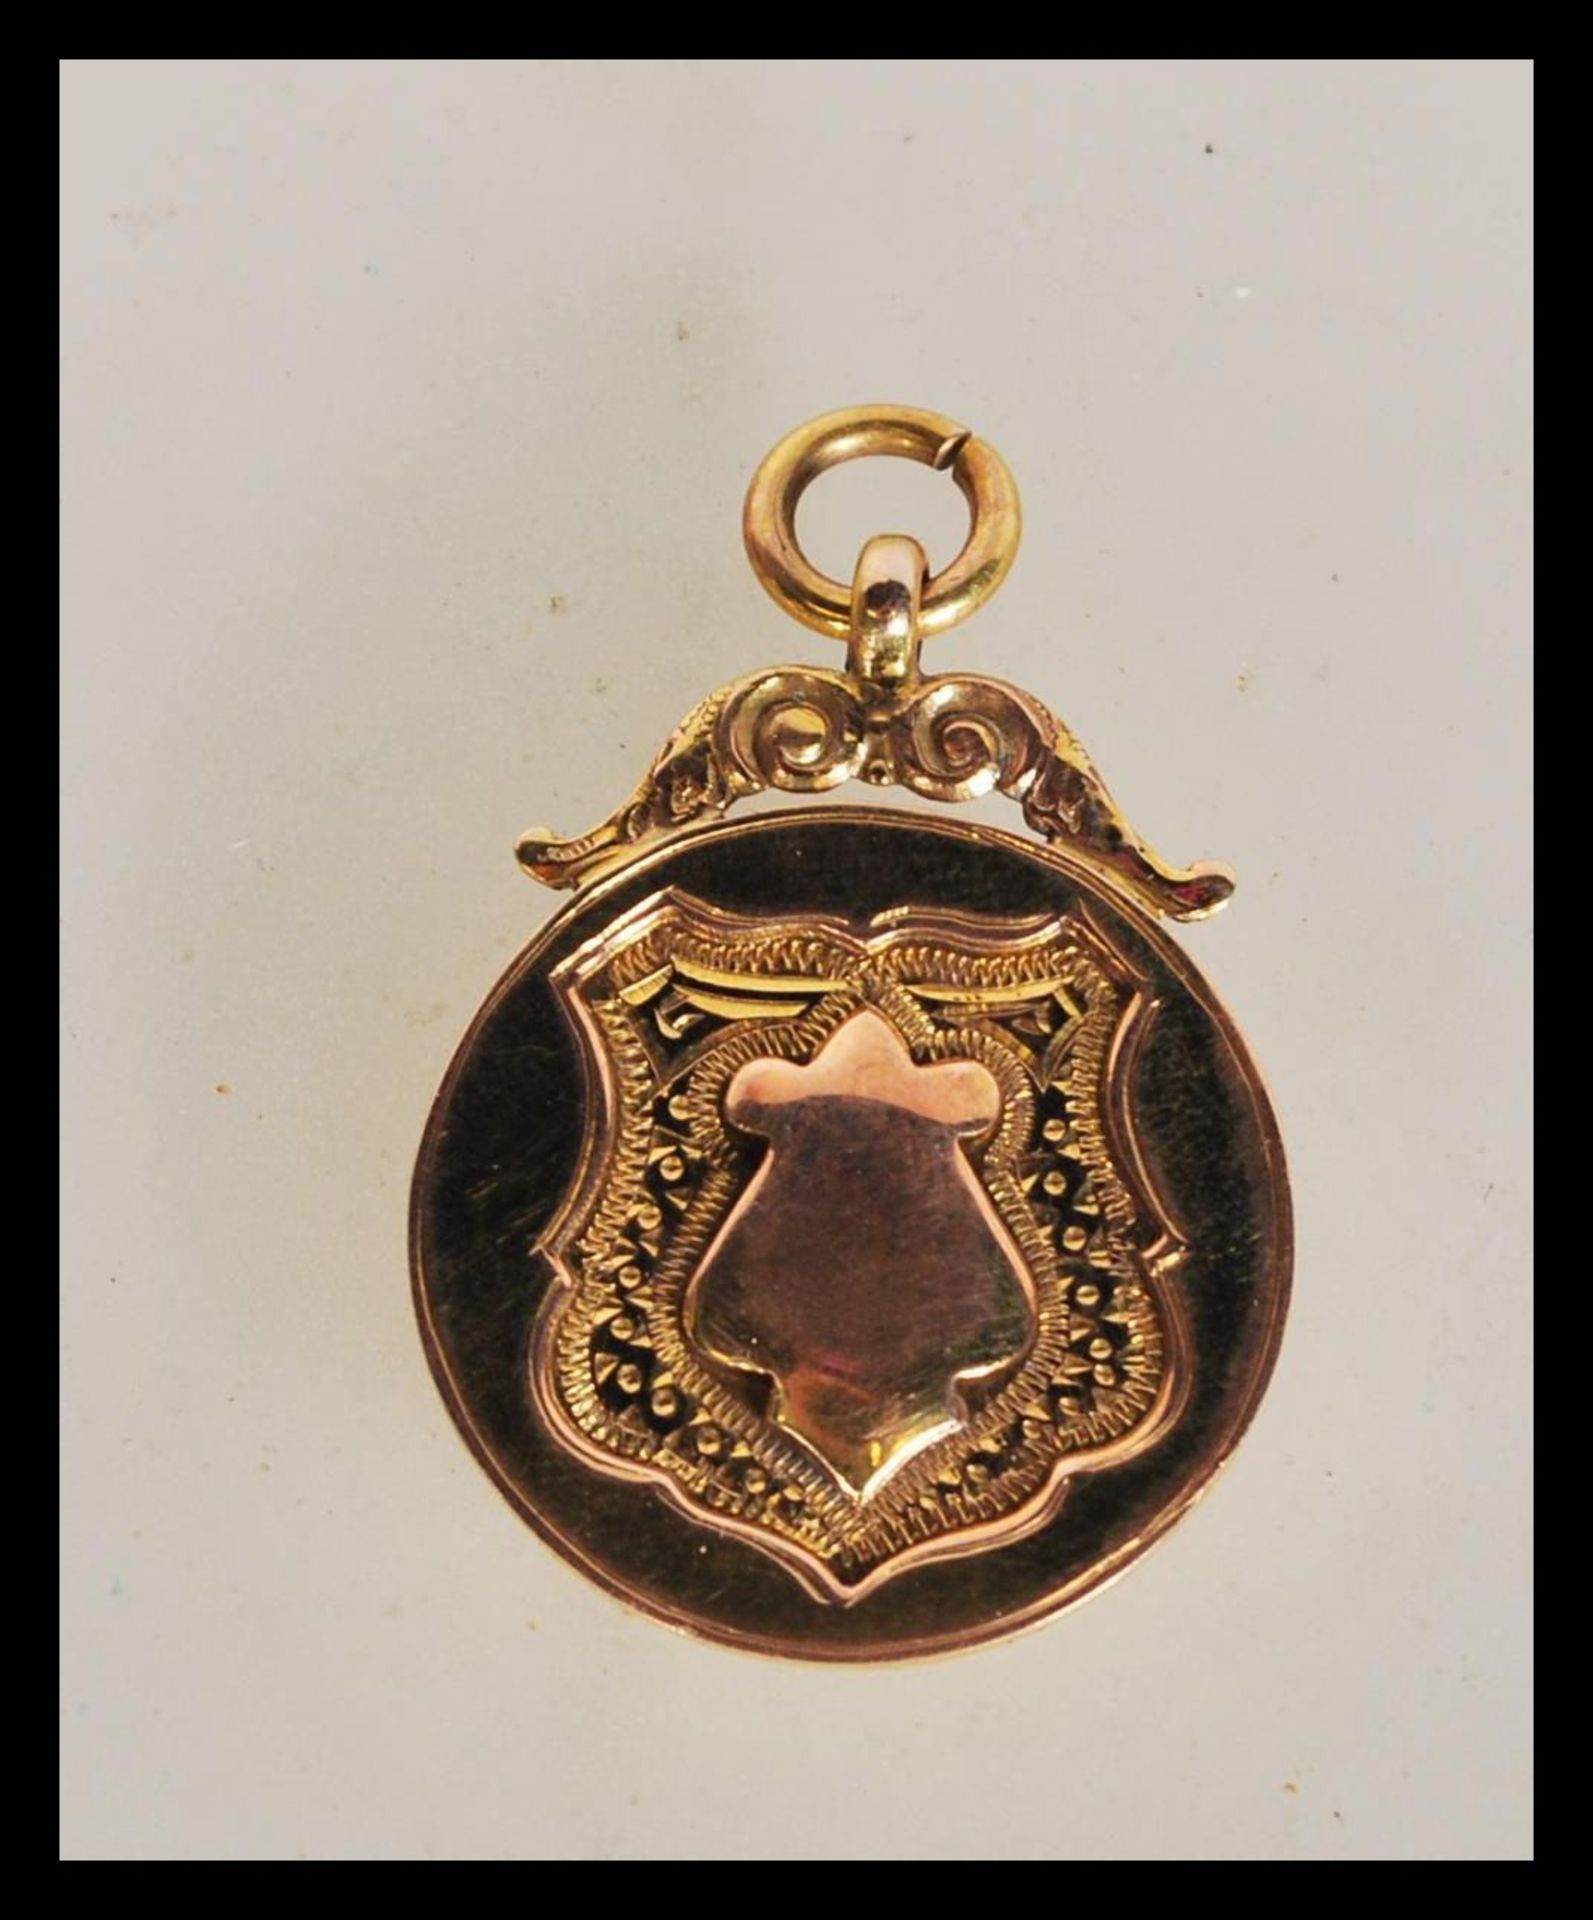 An early 20th Century hallmarked 9ct gold armoril pocket watch chain fob pendant. Weighs 6.1